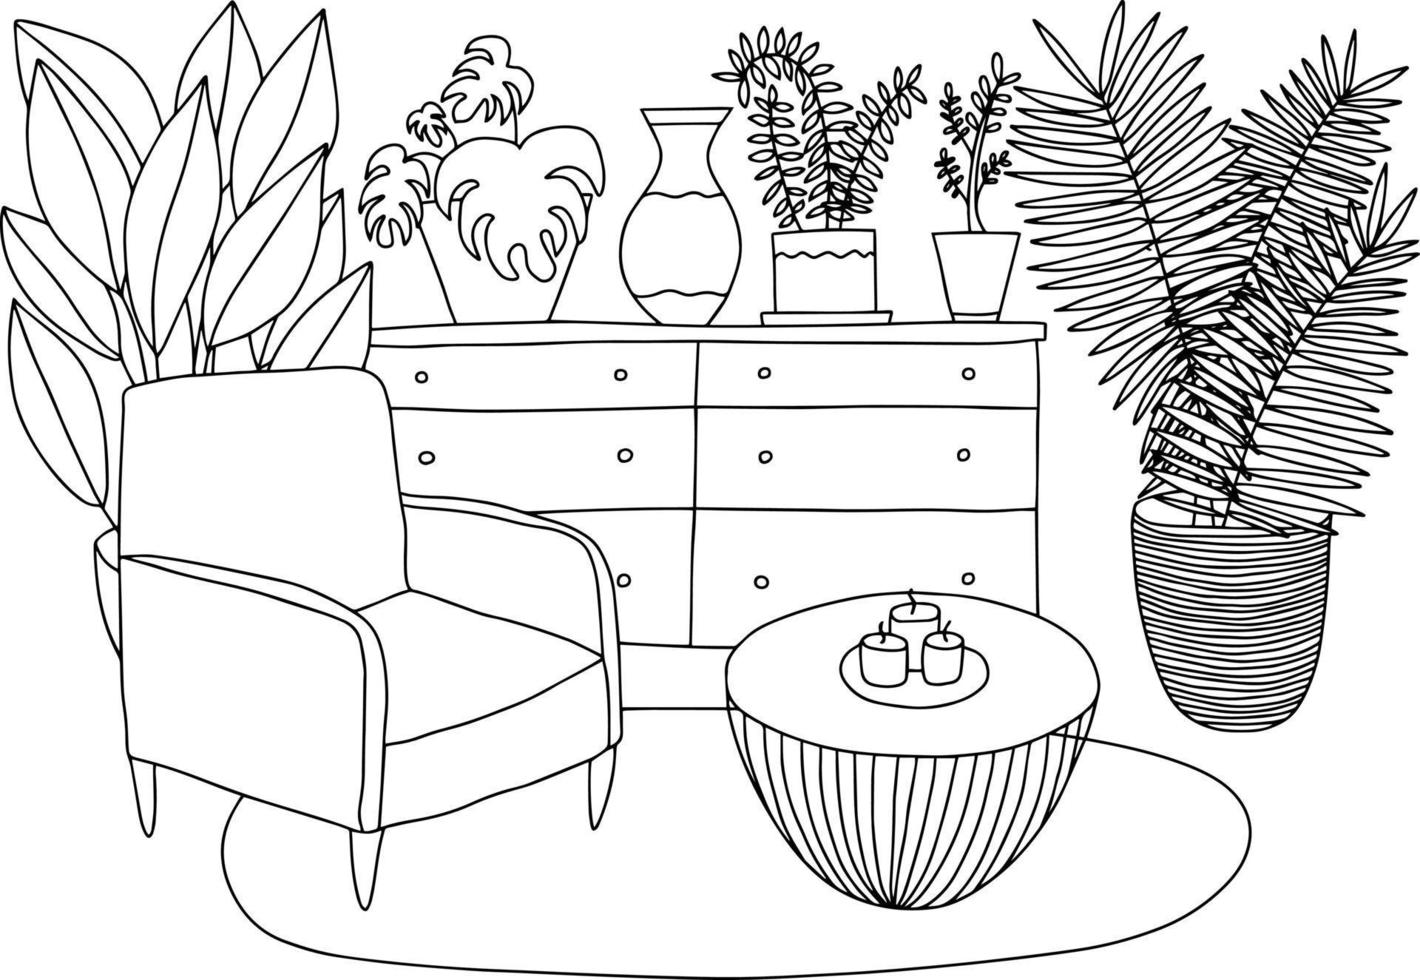 Living room interior coloring page. Cozy  interior design living room. Coloring page for children and adults vector